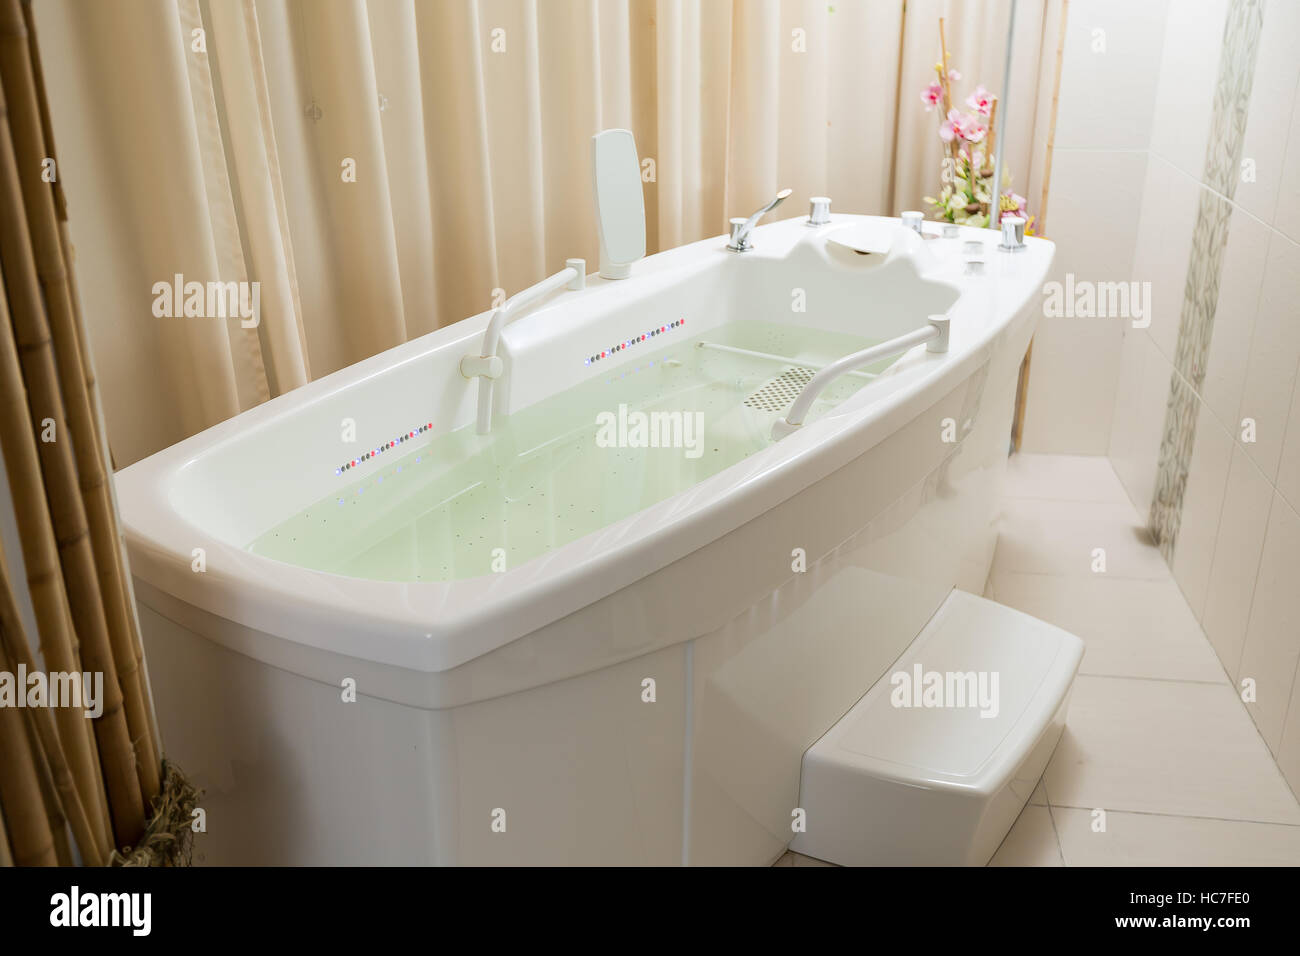 Empty jacuzzi, tub filled with water in the spa Stock Photo